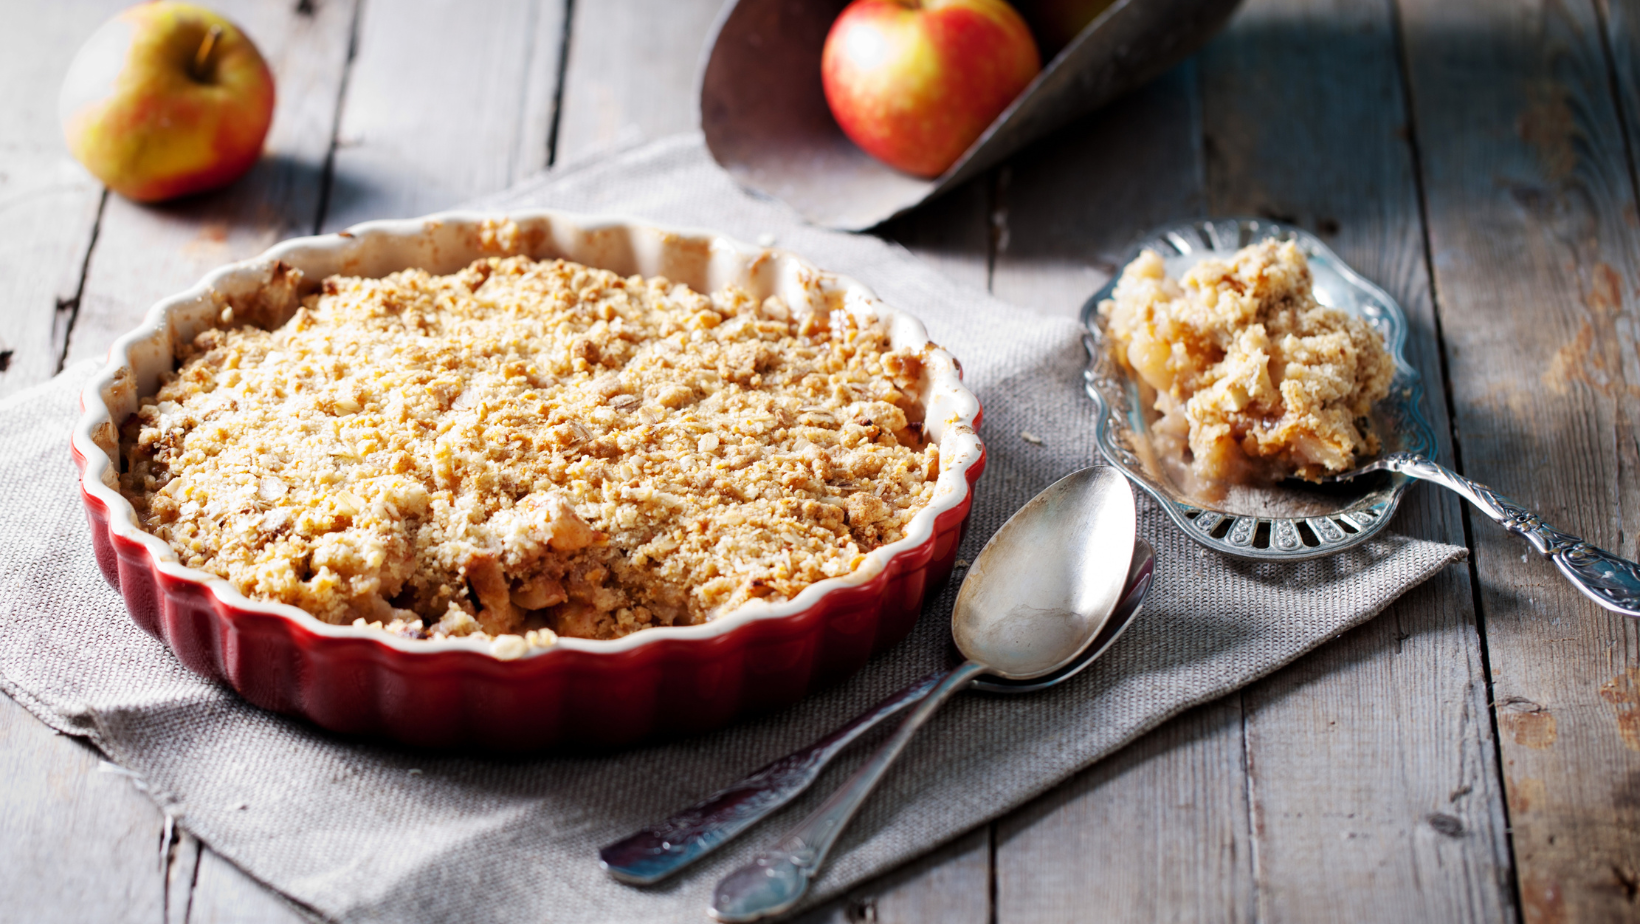 Apple crumble with fresh apples